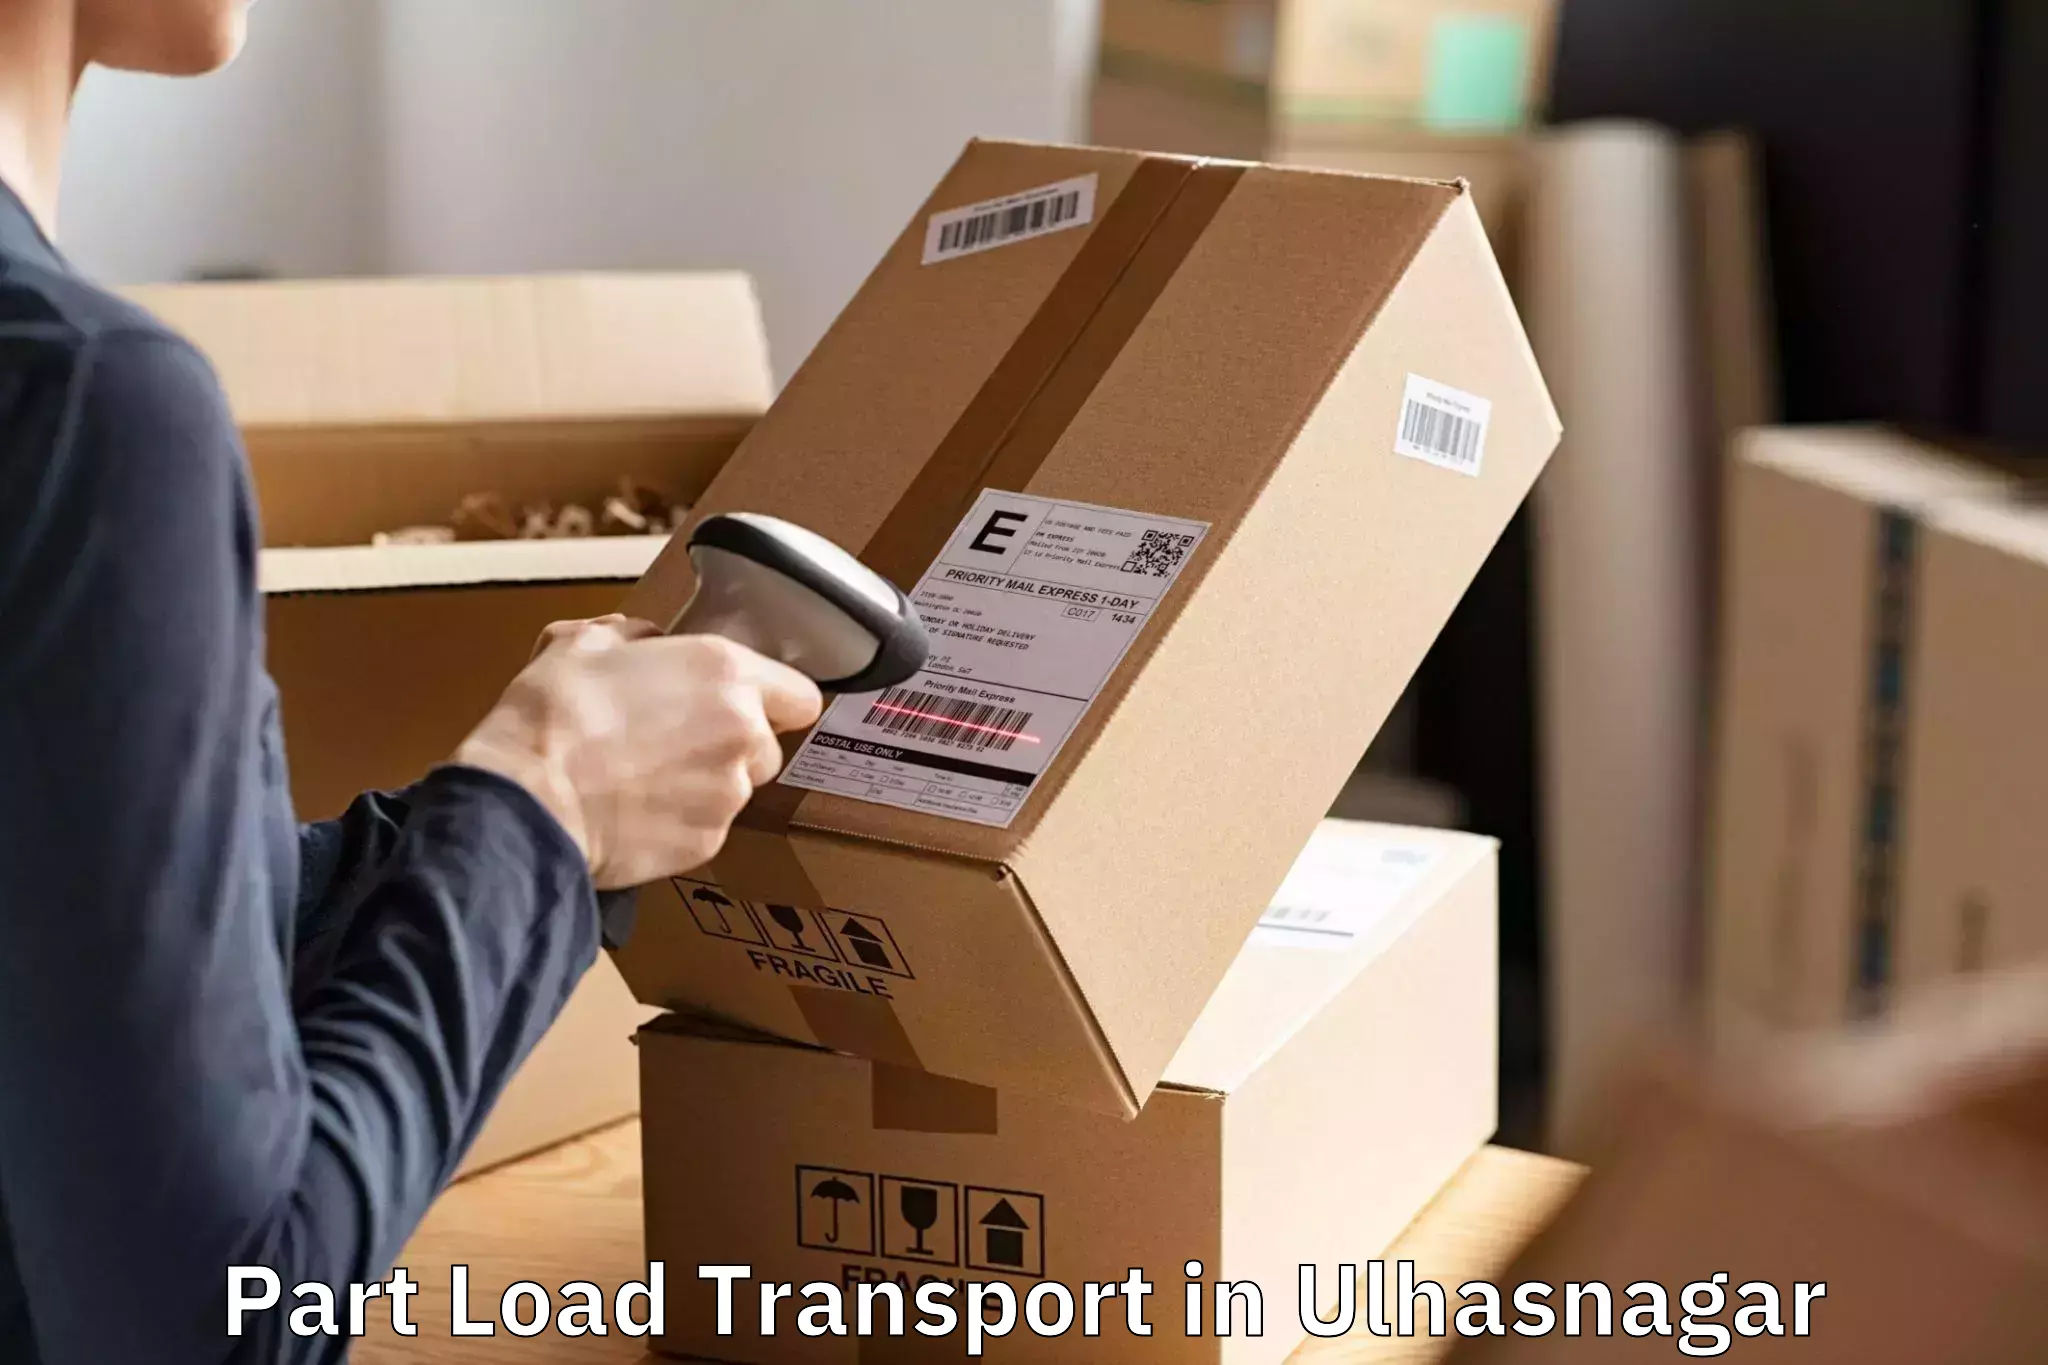 Top Part Load Transport Available in Ulhasnagar, Maharashtra (MH)